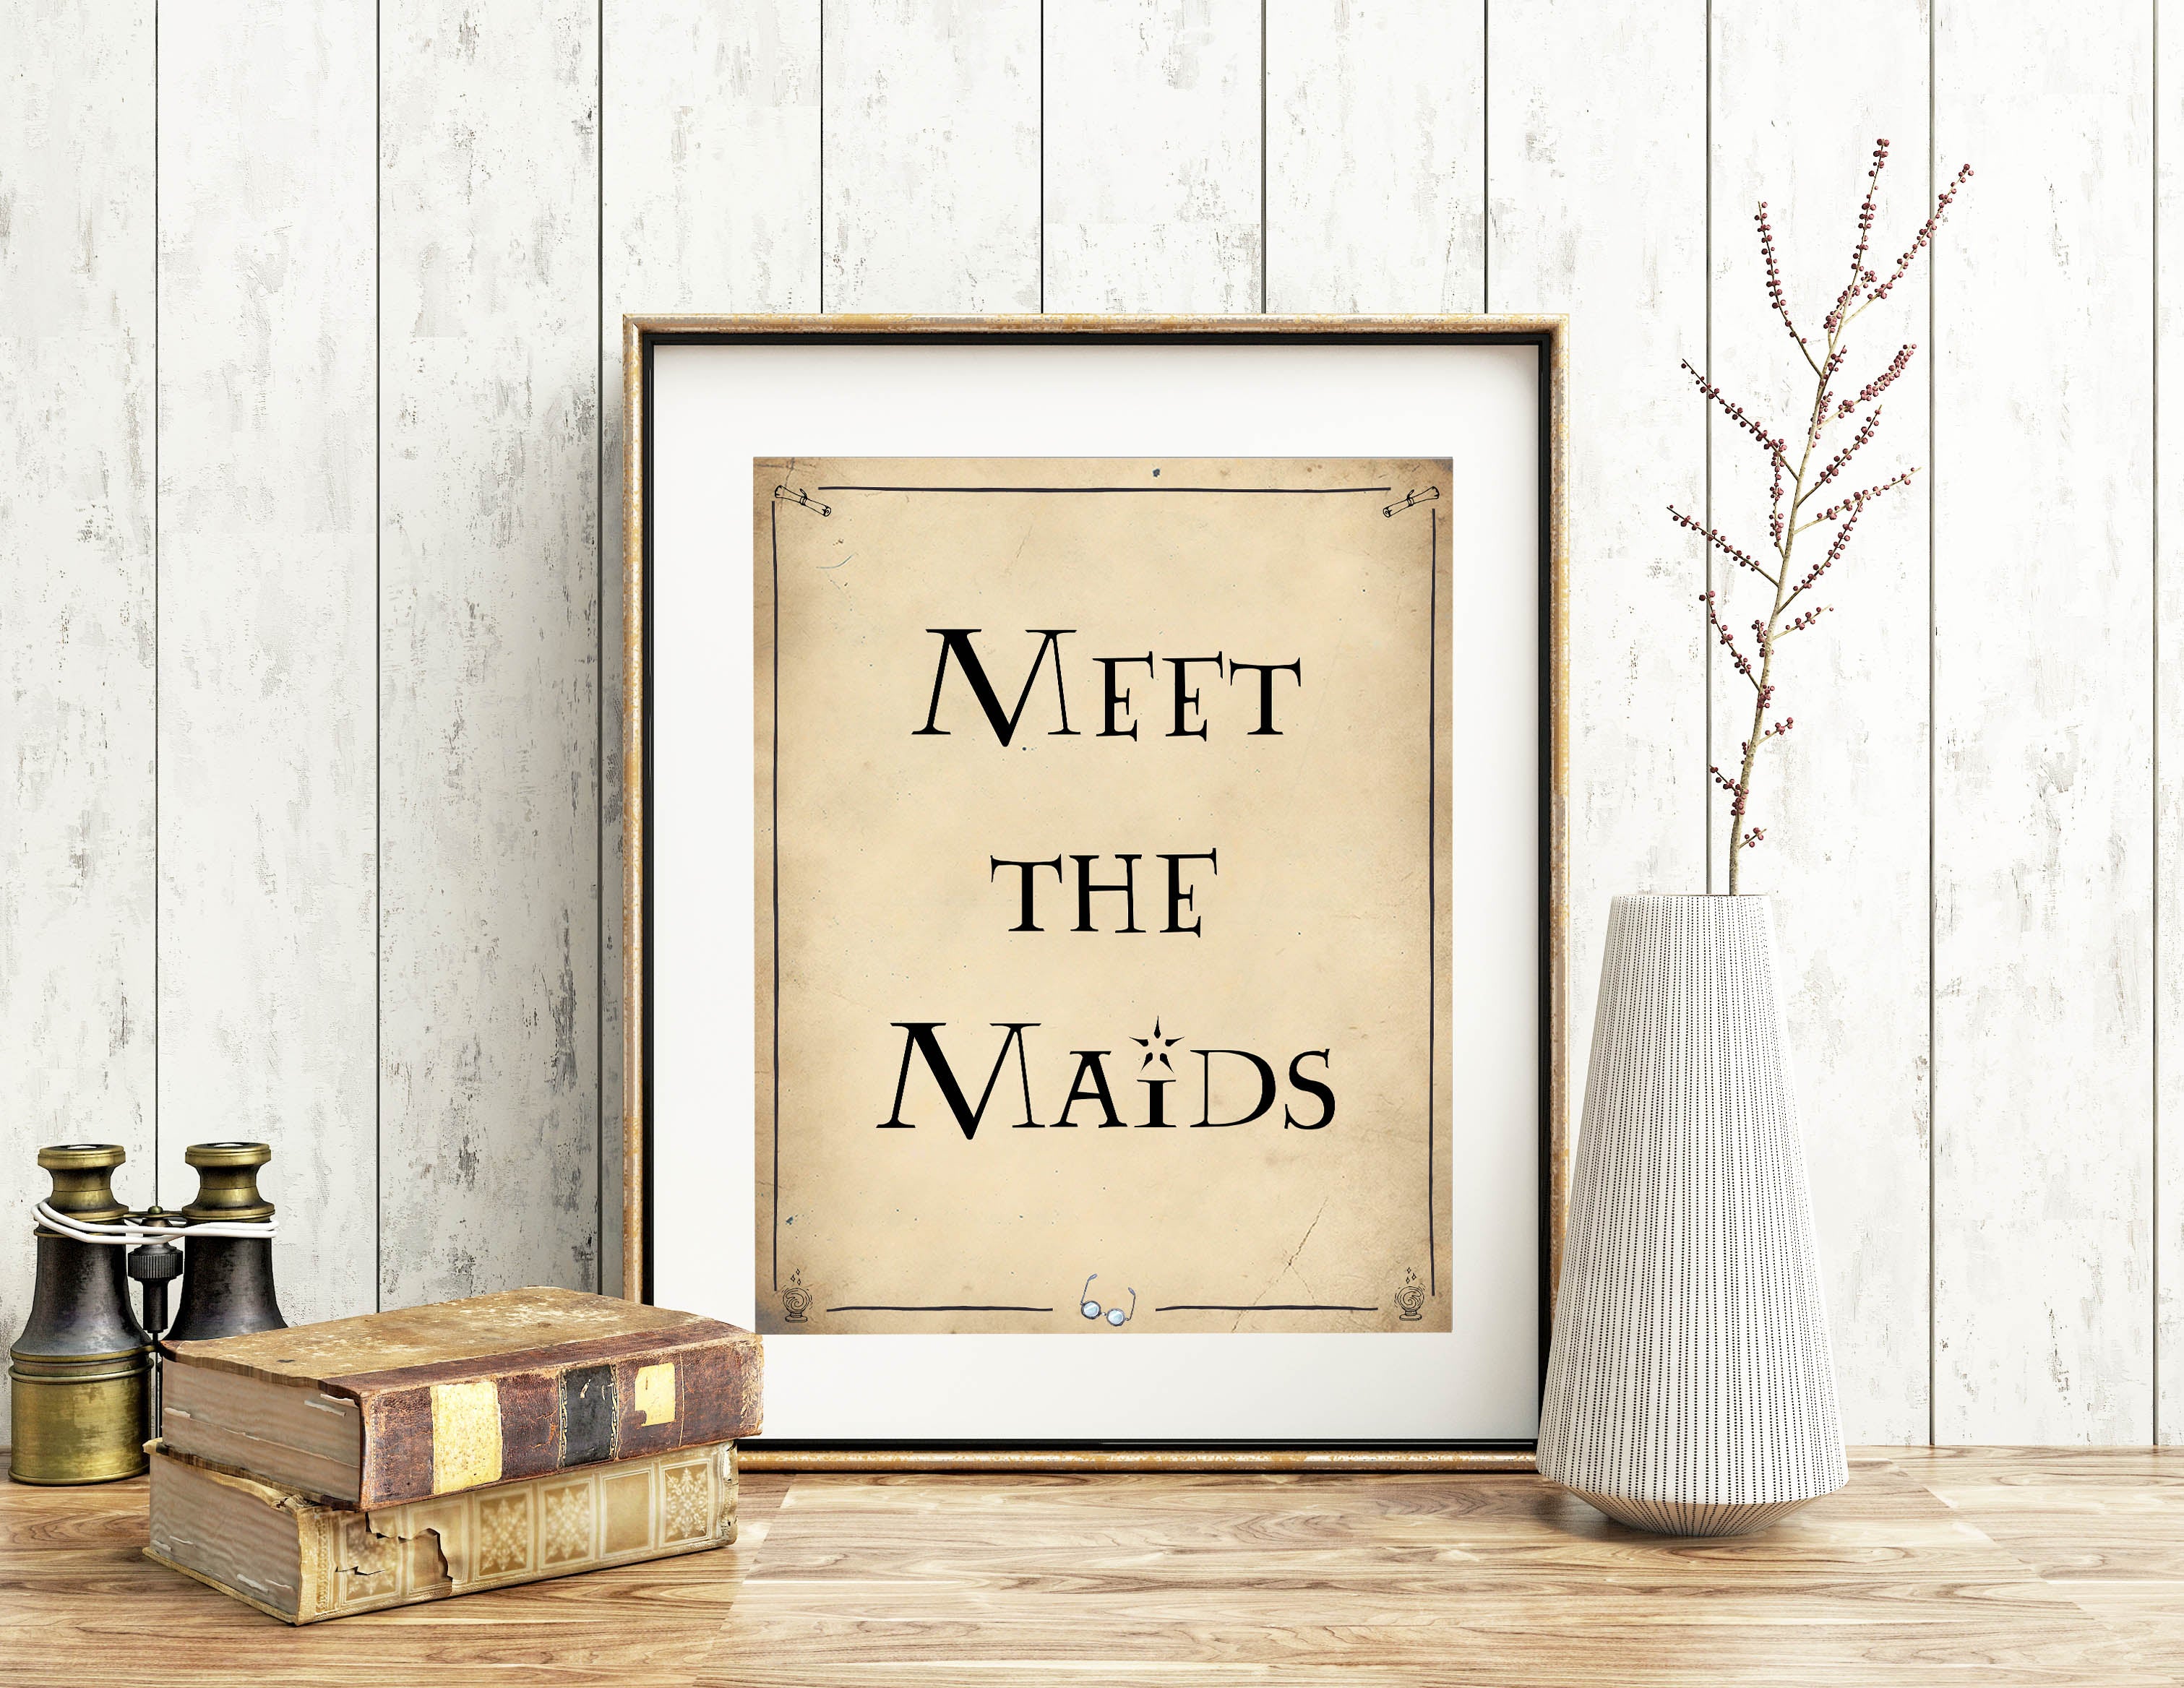 meet the maids bridal signs, meet the maids, Printable bridal shower signs, Harry Potter bridal shower decor, Harry Potter bridal shower decor ideas, fun bridal shower decor, bridal shower game ideas, Harry Potter bridal shower ideas